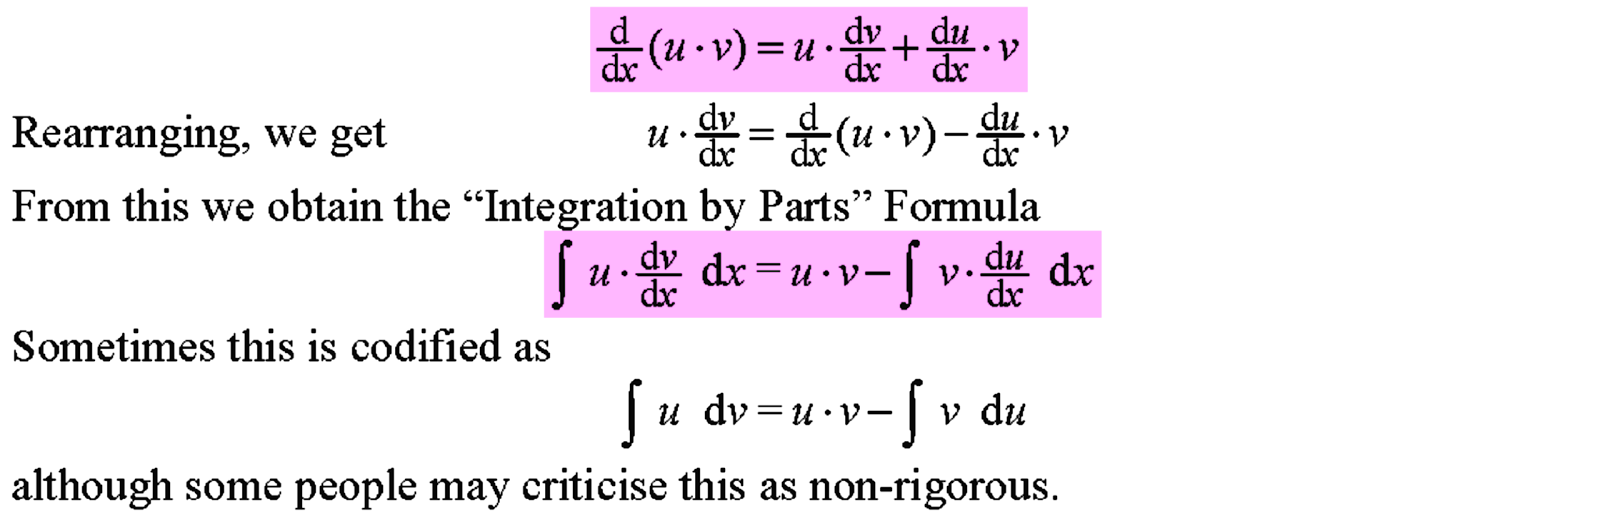 Truly Singaporean Singapore Mathematics H2 Expository Integration By Parts And The D Etail Heuristic